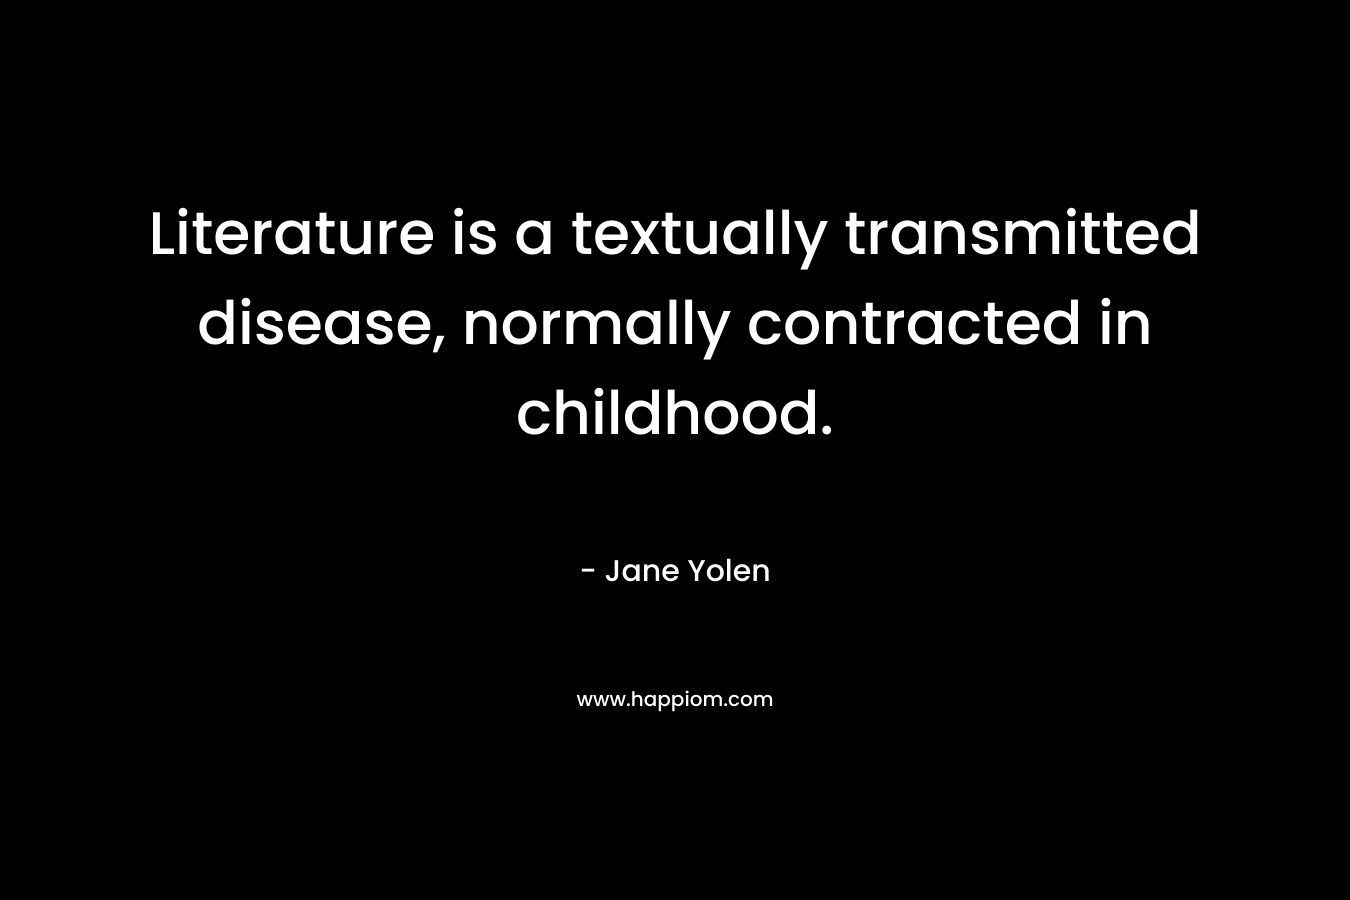 Literature is a textually transmitted disease, normally contracted in childhood.